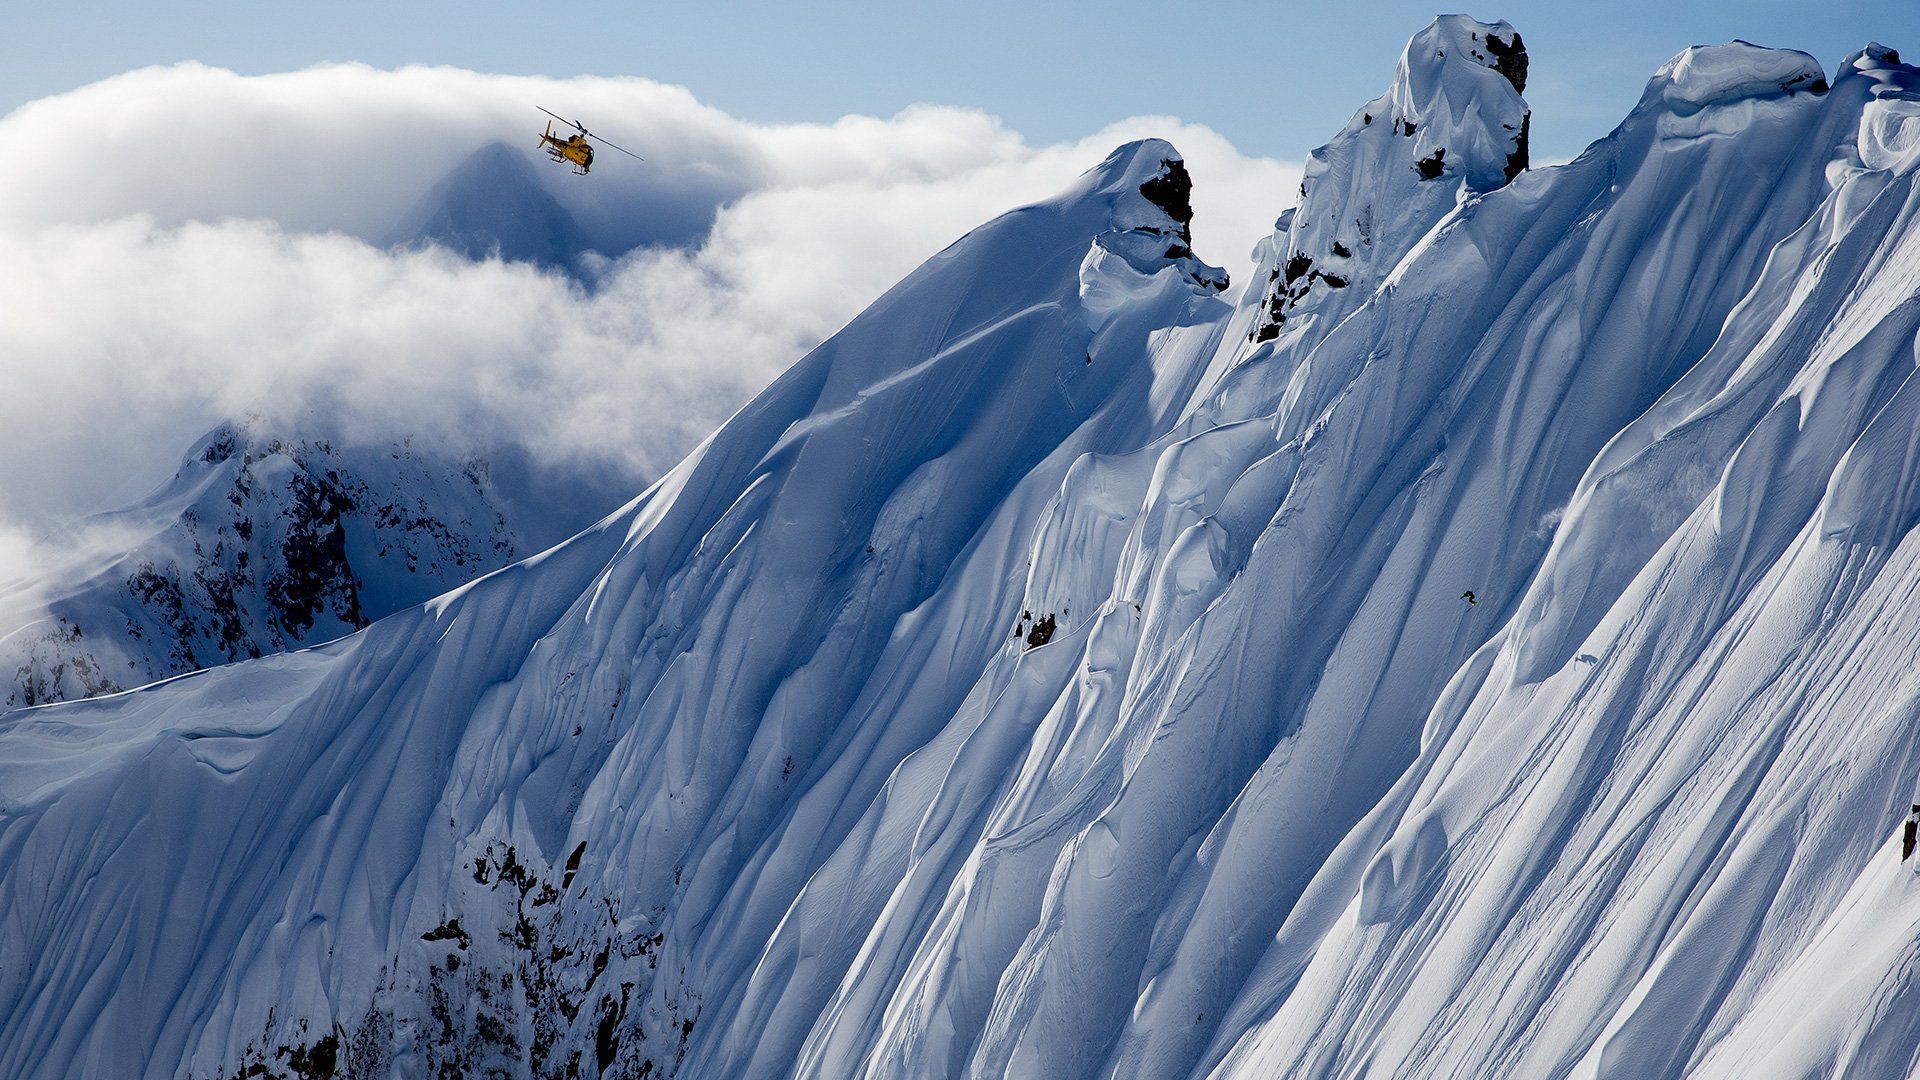 Dwarfed by huge, snow-covered, sheer cliffs near Juneau, Alaska, a member of the Legs of Steel group is barely visible skiing almost vertically downhill as a helicopter hovers above.